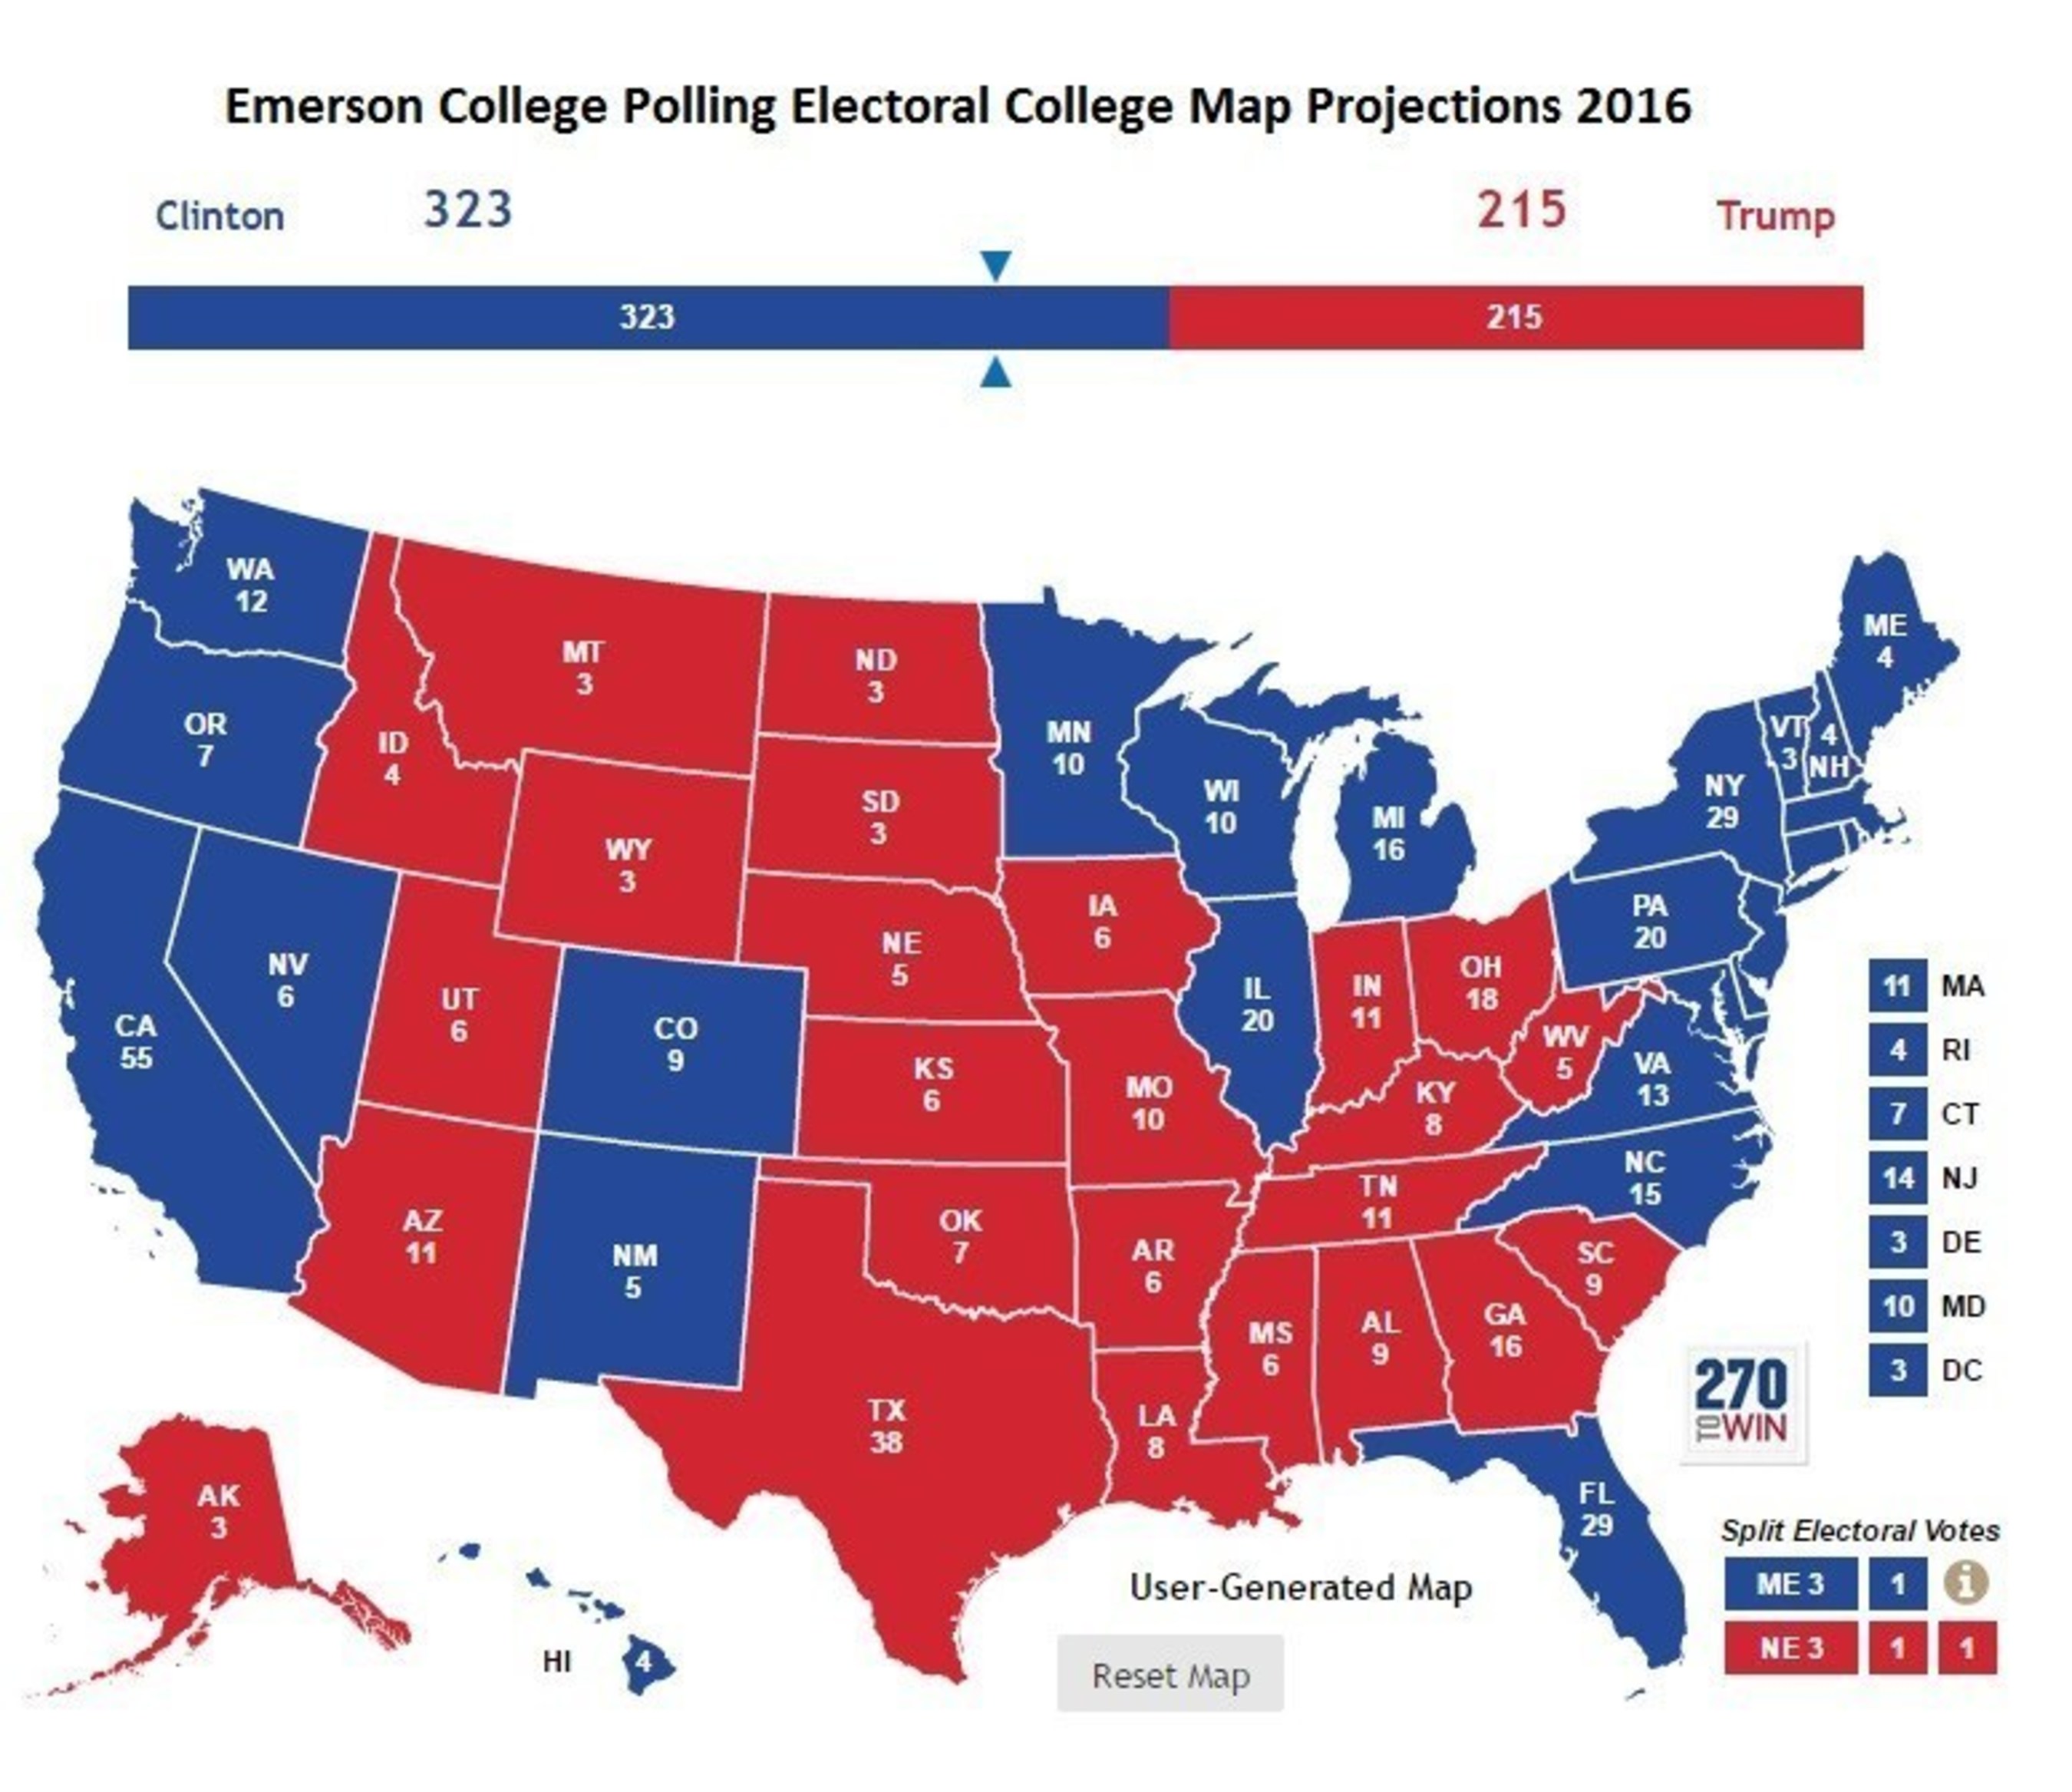 Emerson College Polls: Emerson Map Shows Many Tight Races But a Lopsided Win for ...